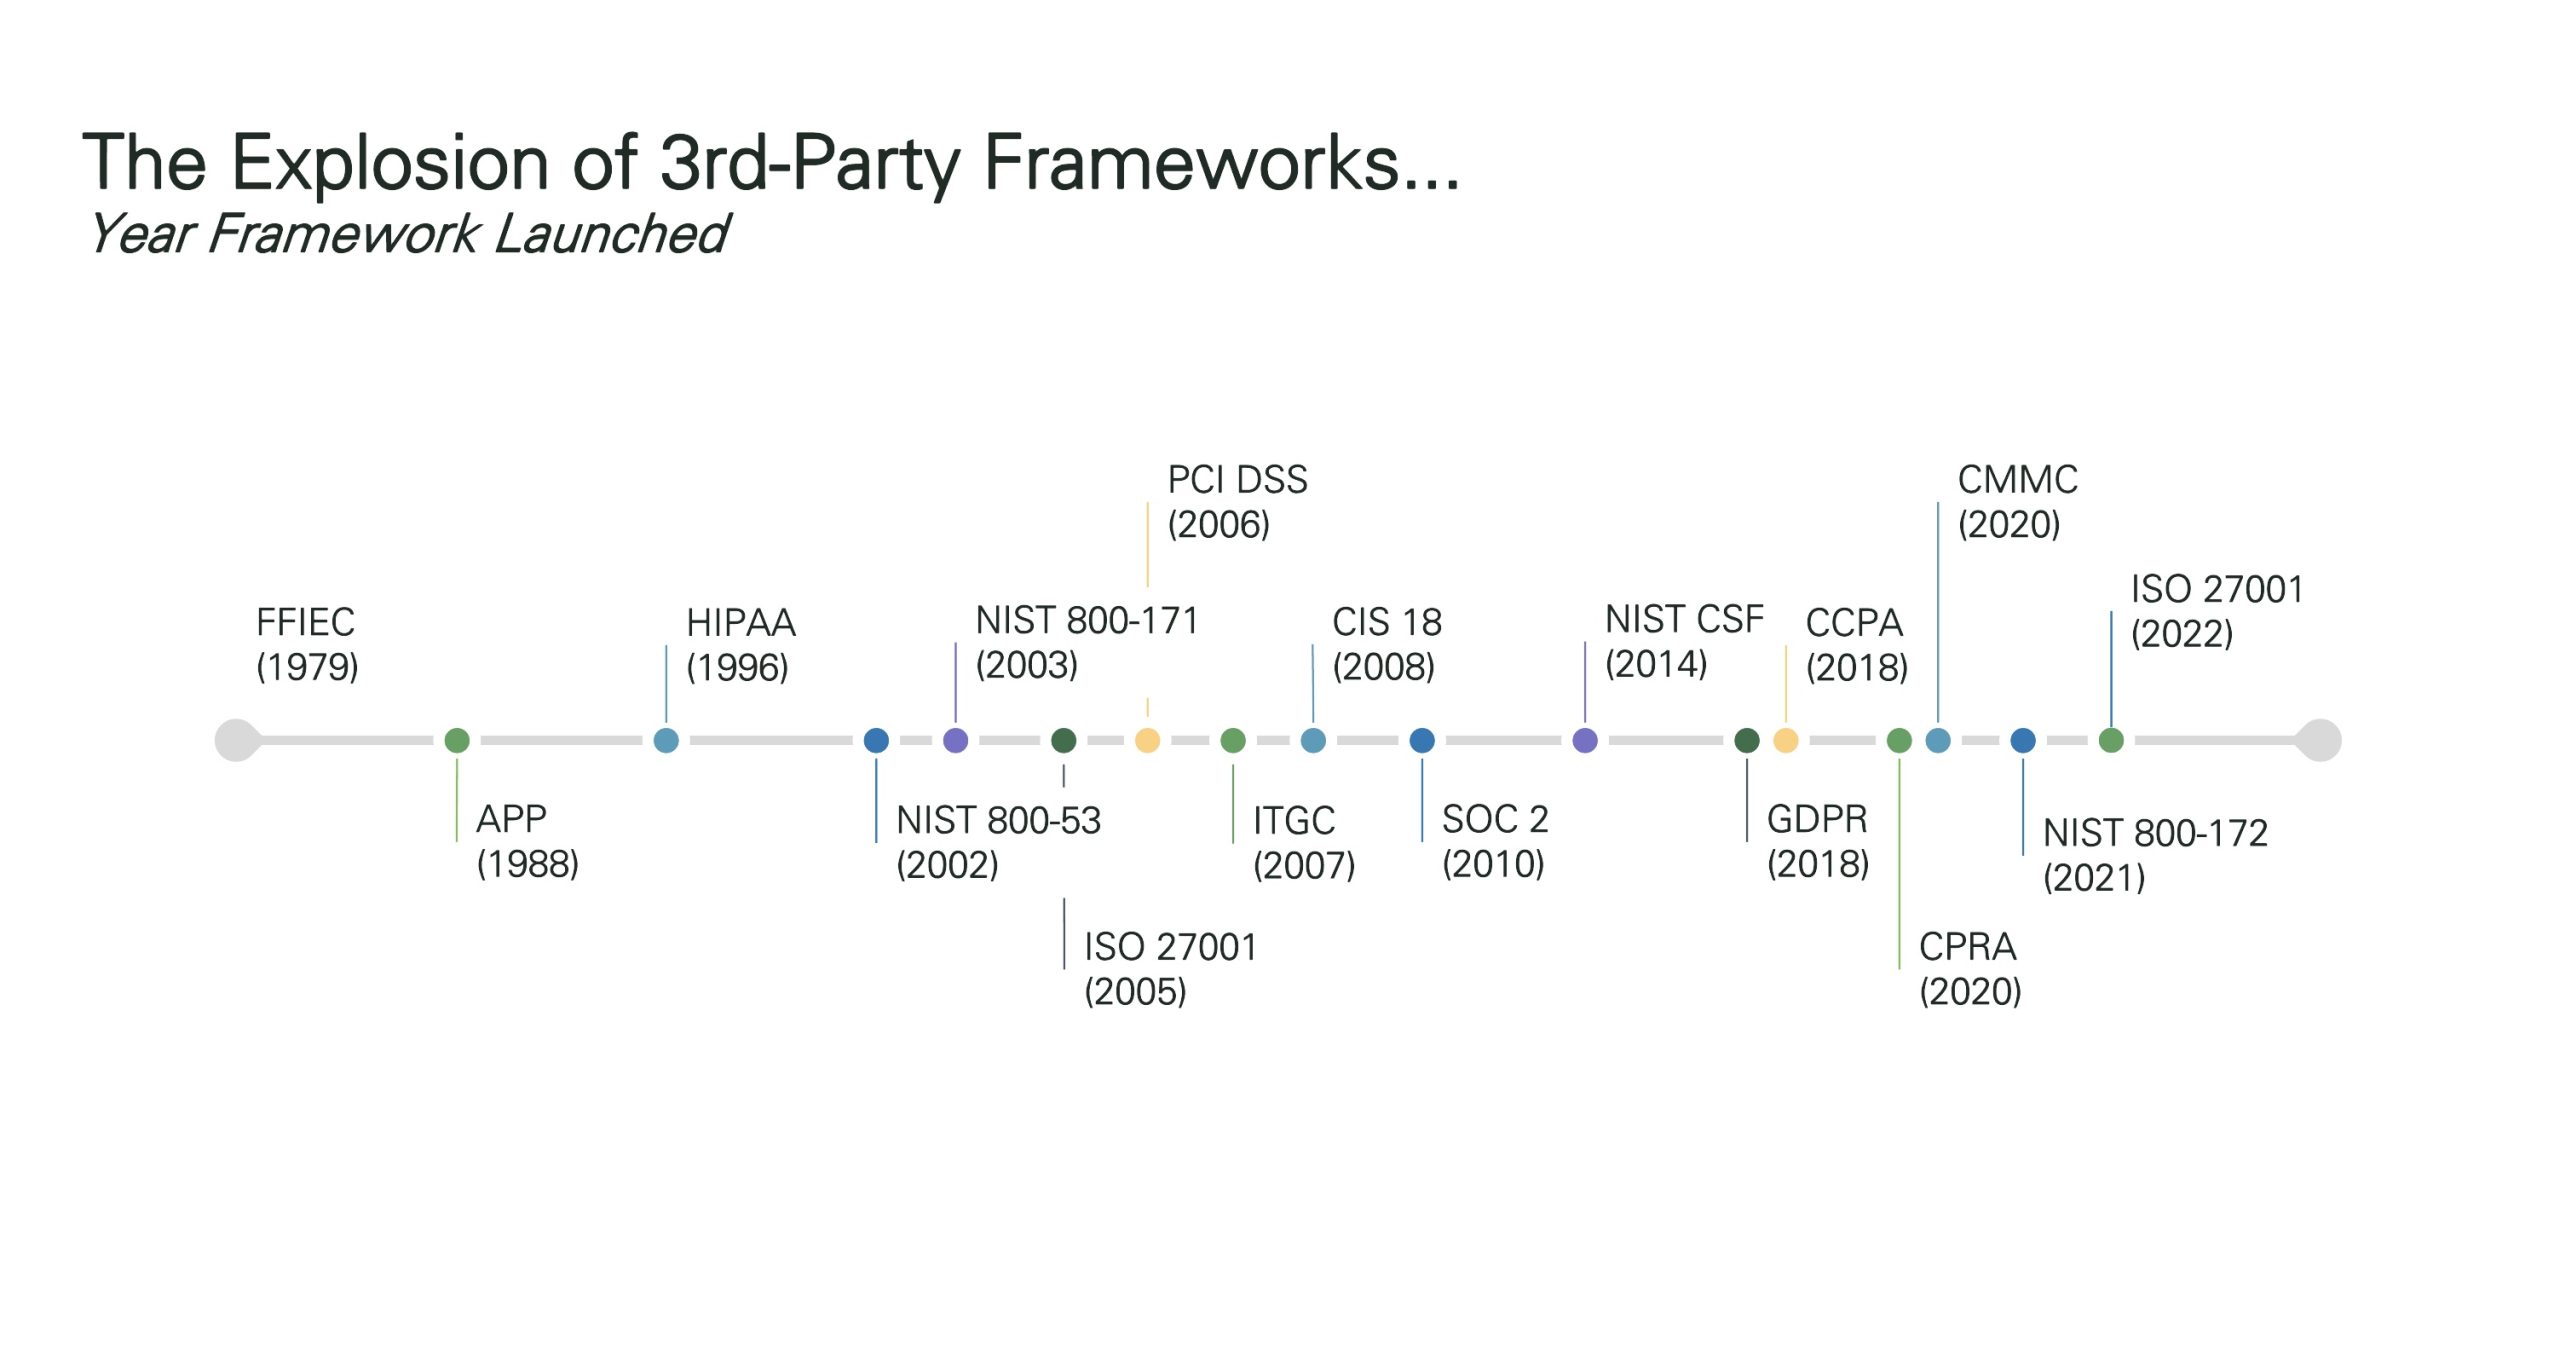 Timeline showing the progression of third-party frameworks